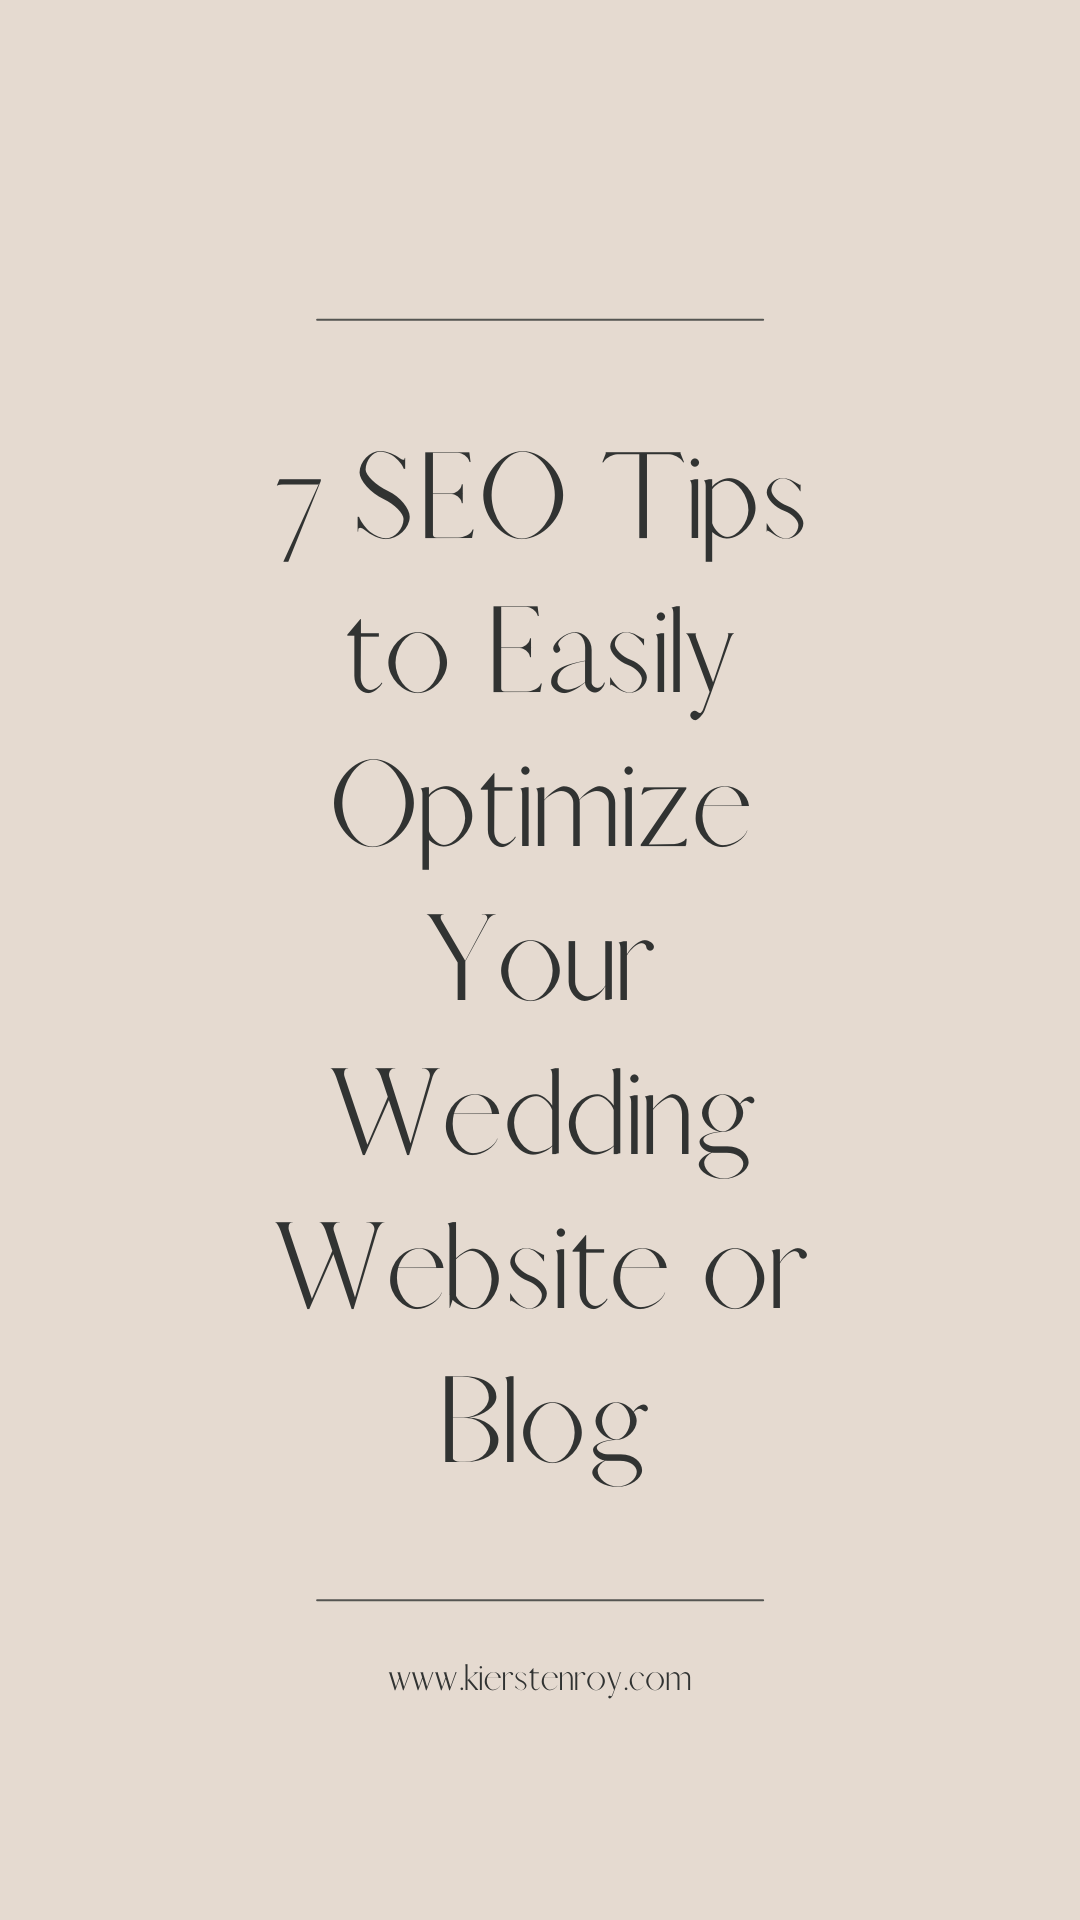 7 SEO Tips to Easily Optimize Your Wedding Website or Blog